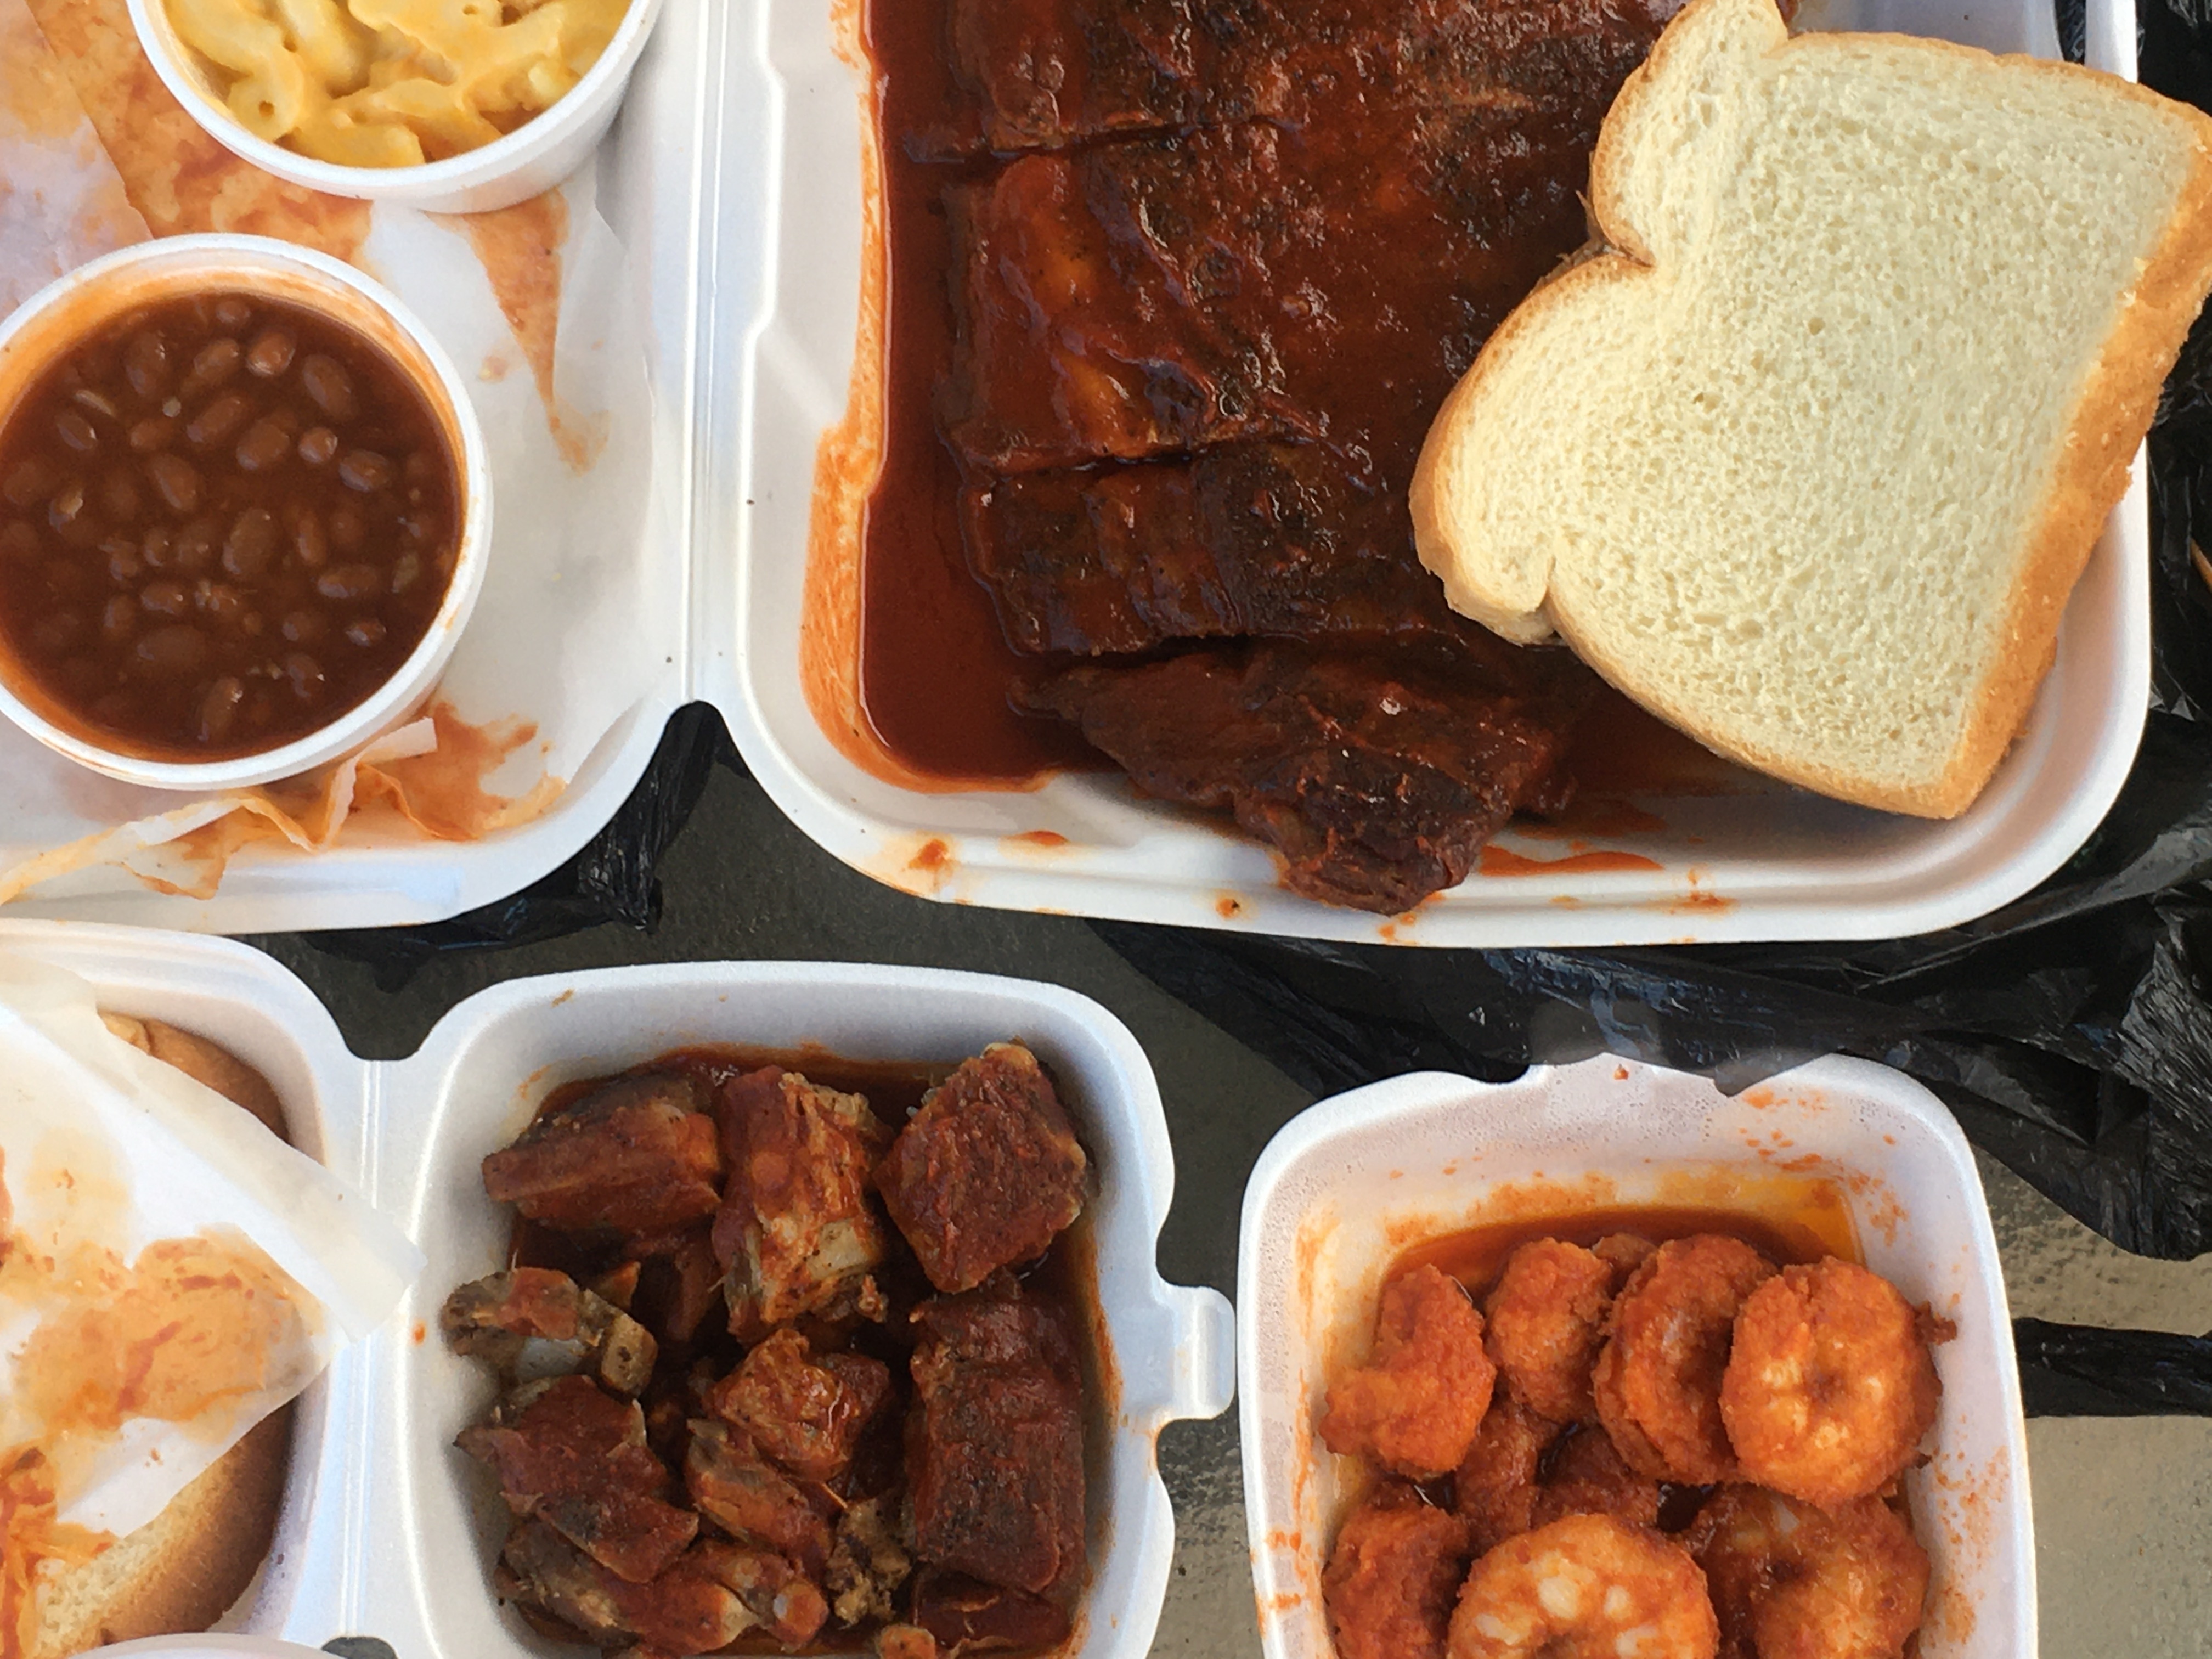 Ribs with white bread, rib tips, and fried shrimp in pools of red sauce in takeout containers.